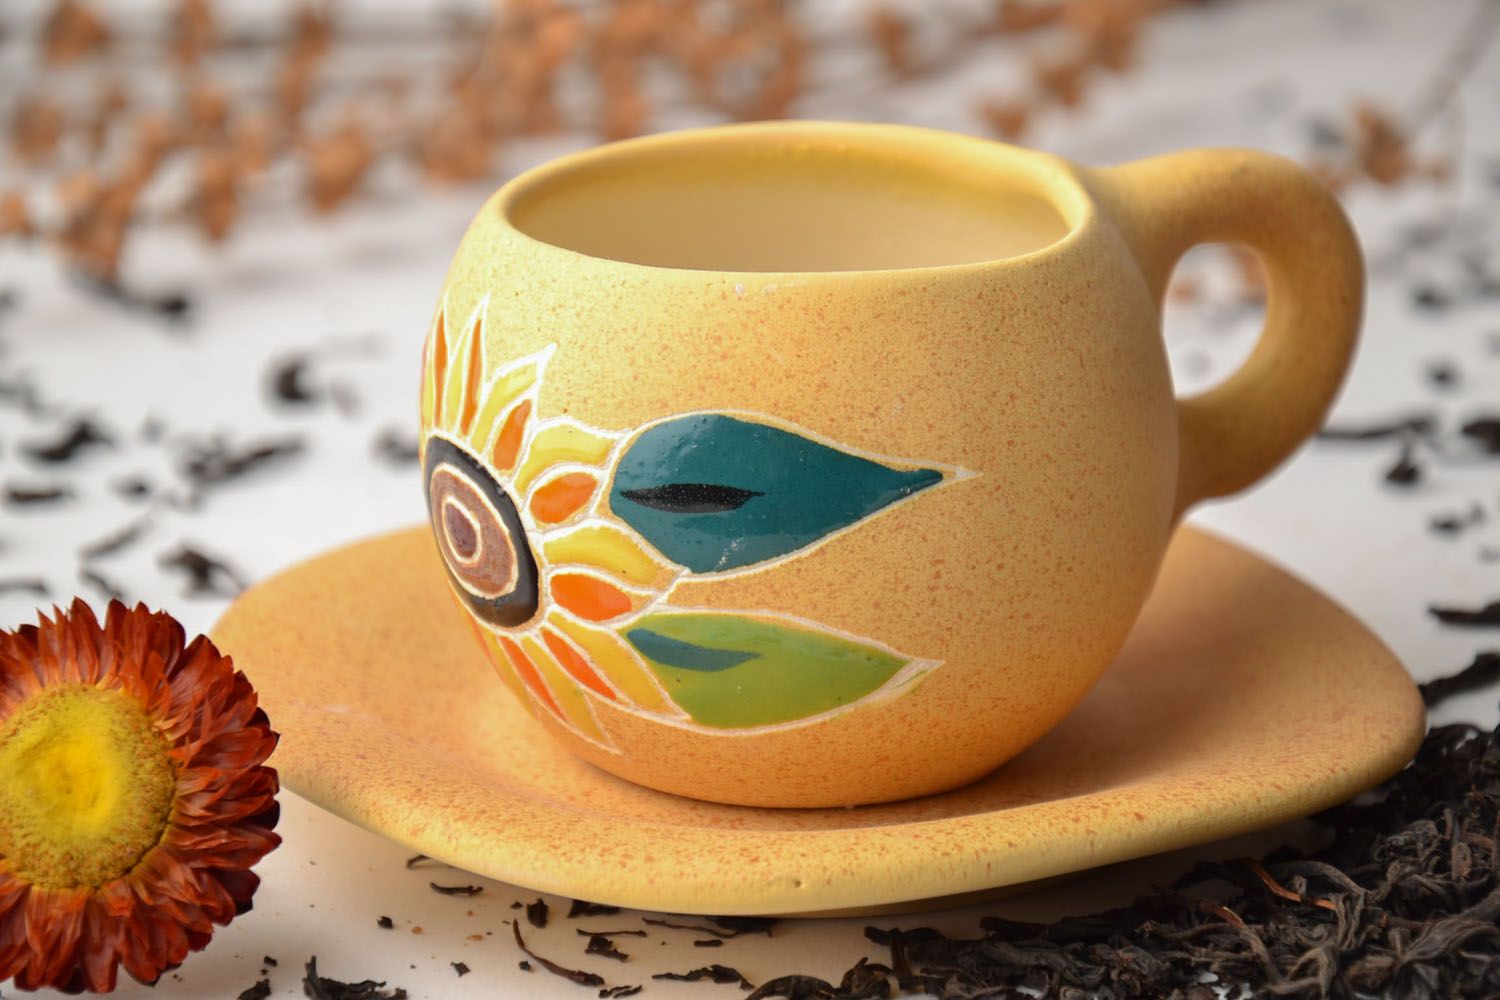 Art clay glazed teacup in yellow color with floral pattern, handle, and saucer photo 1